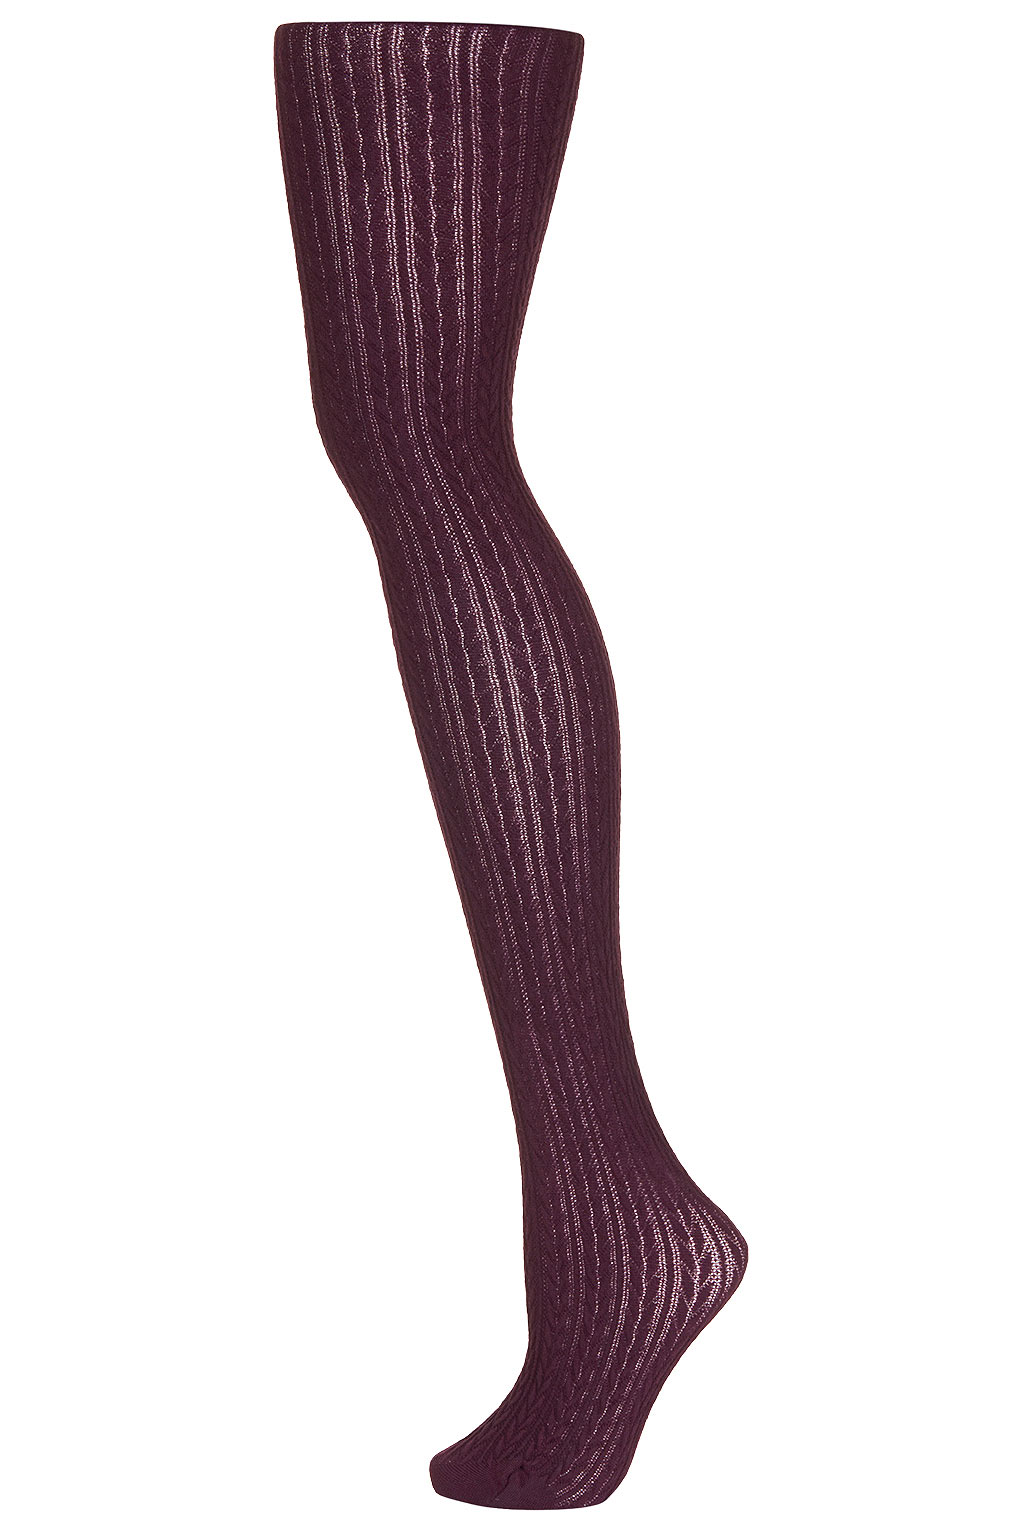 Lyst - Topshop Burgundy Cable Mix Tights in Purple